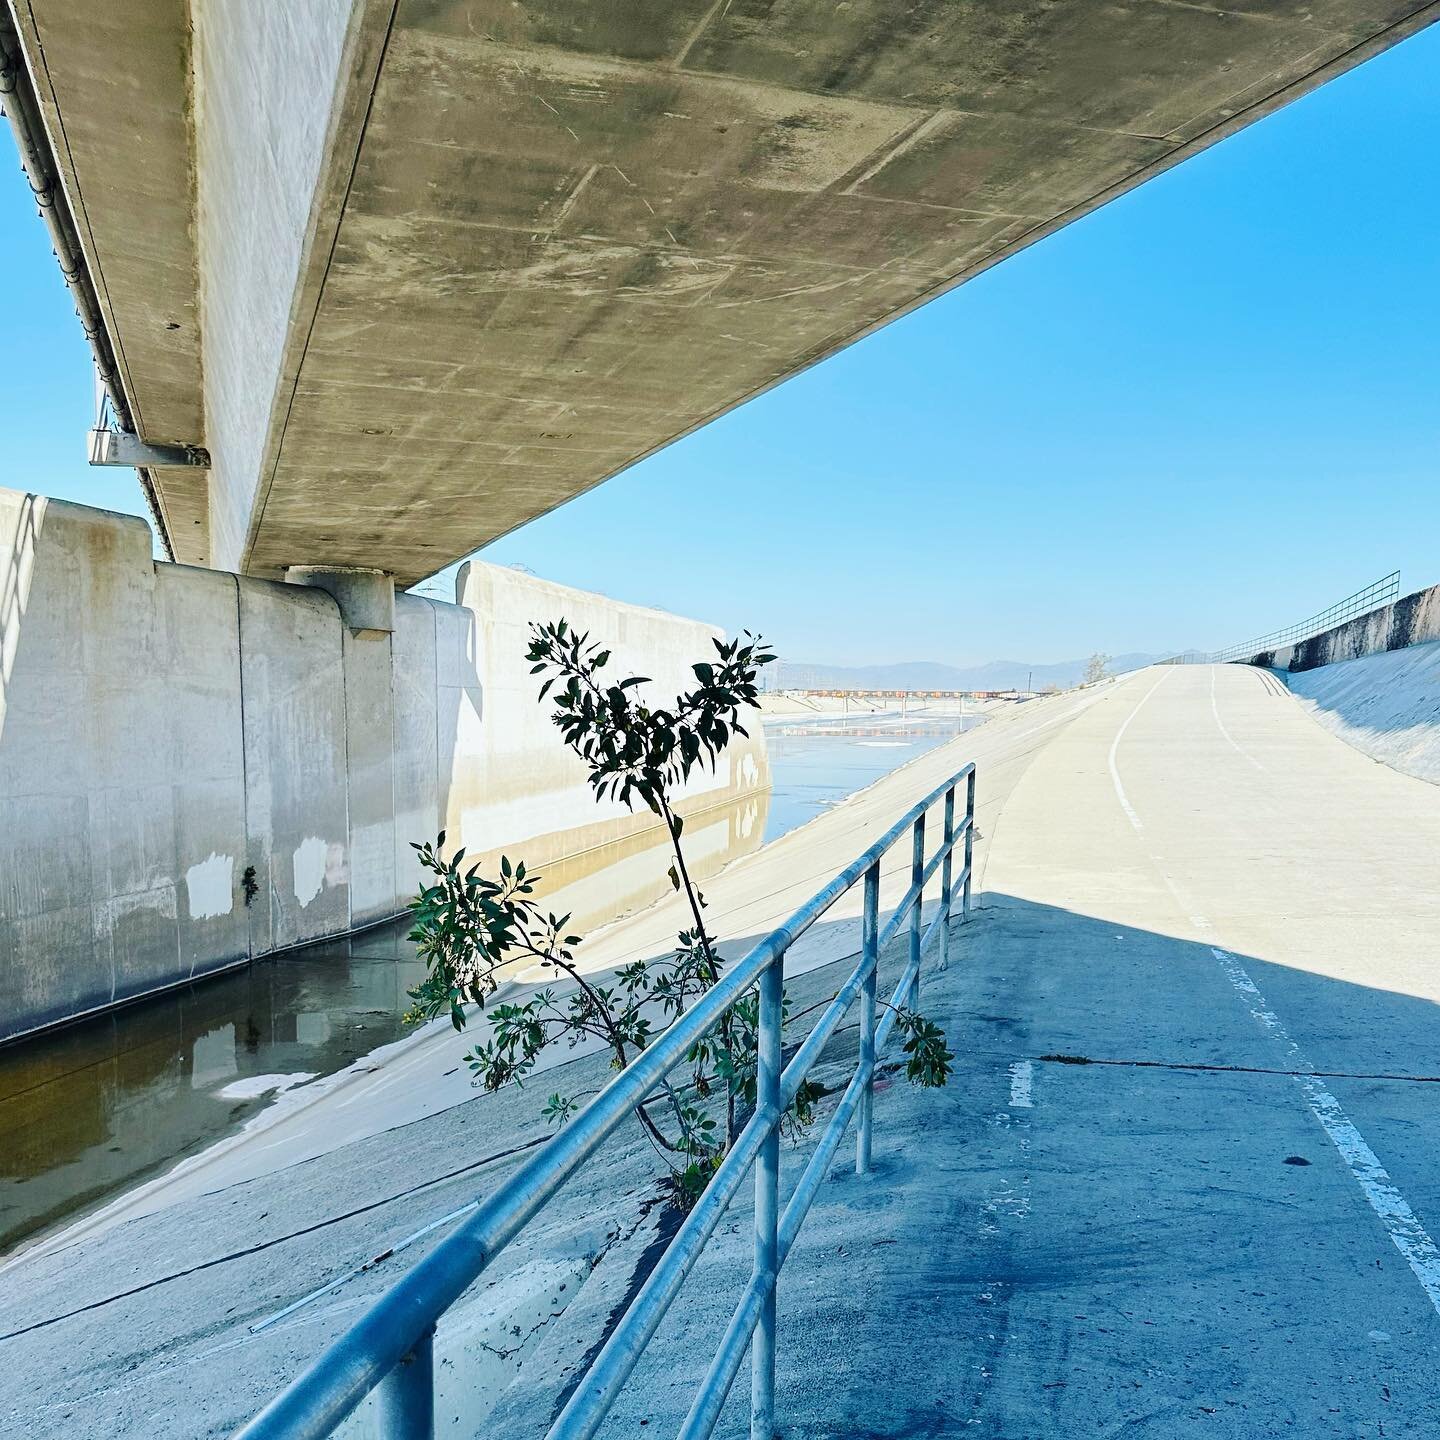 LA River. Shots from my 18 mile run a few weeks ago. Anxiously awaiting the big 26 this weekend!